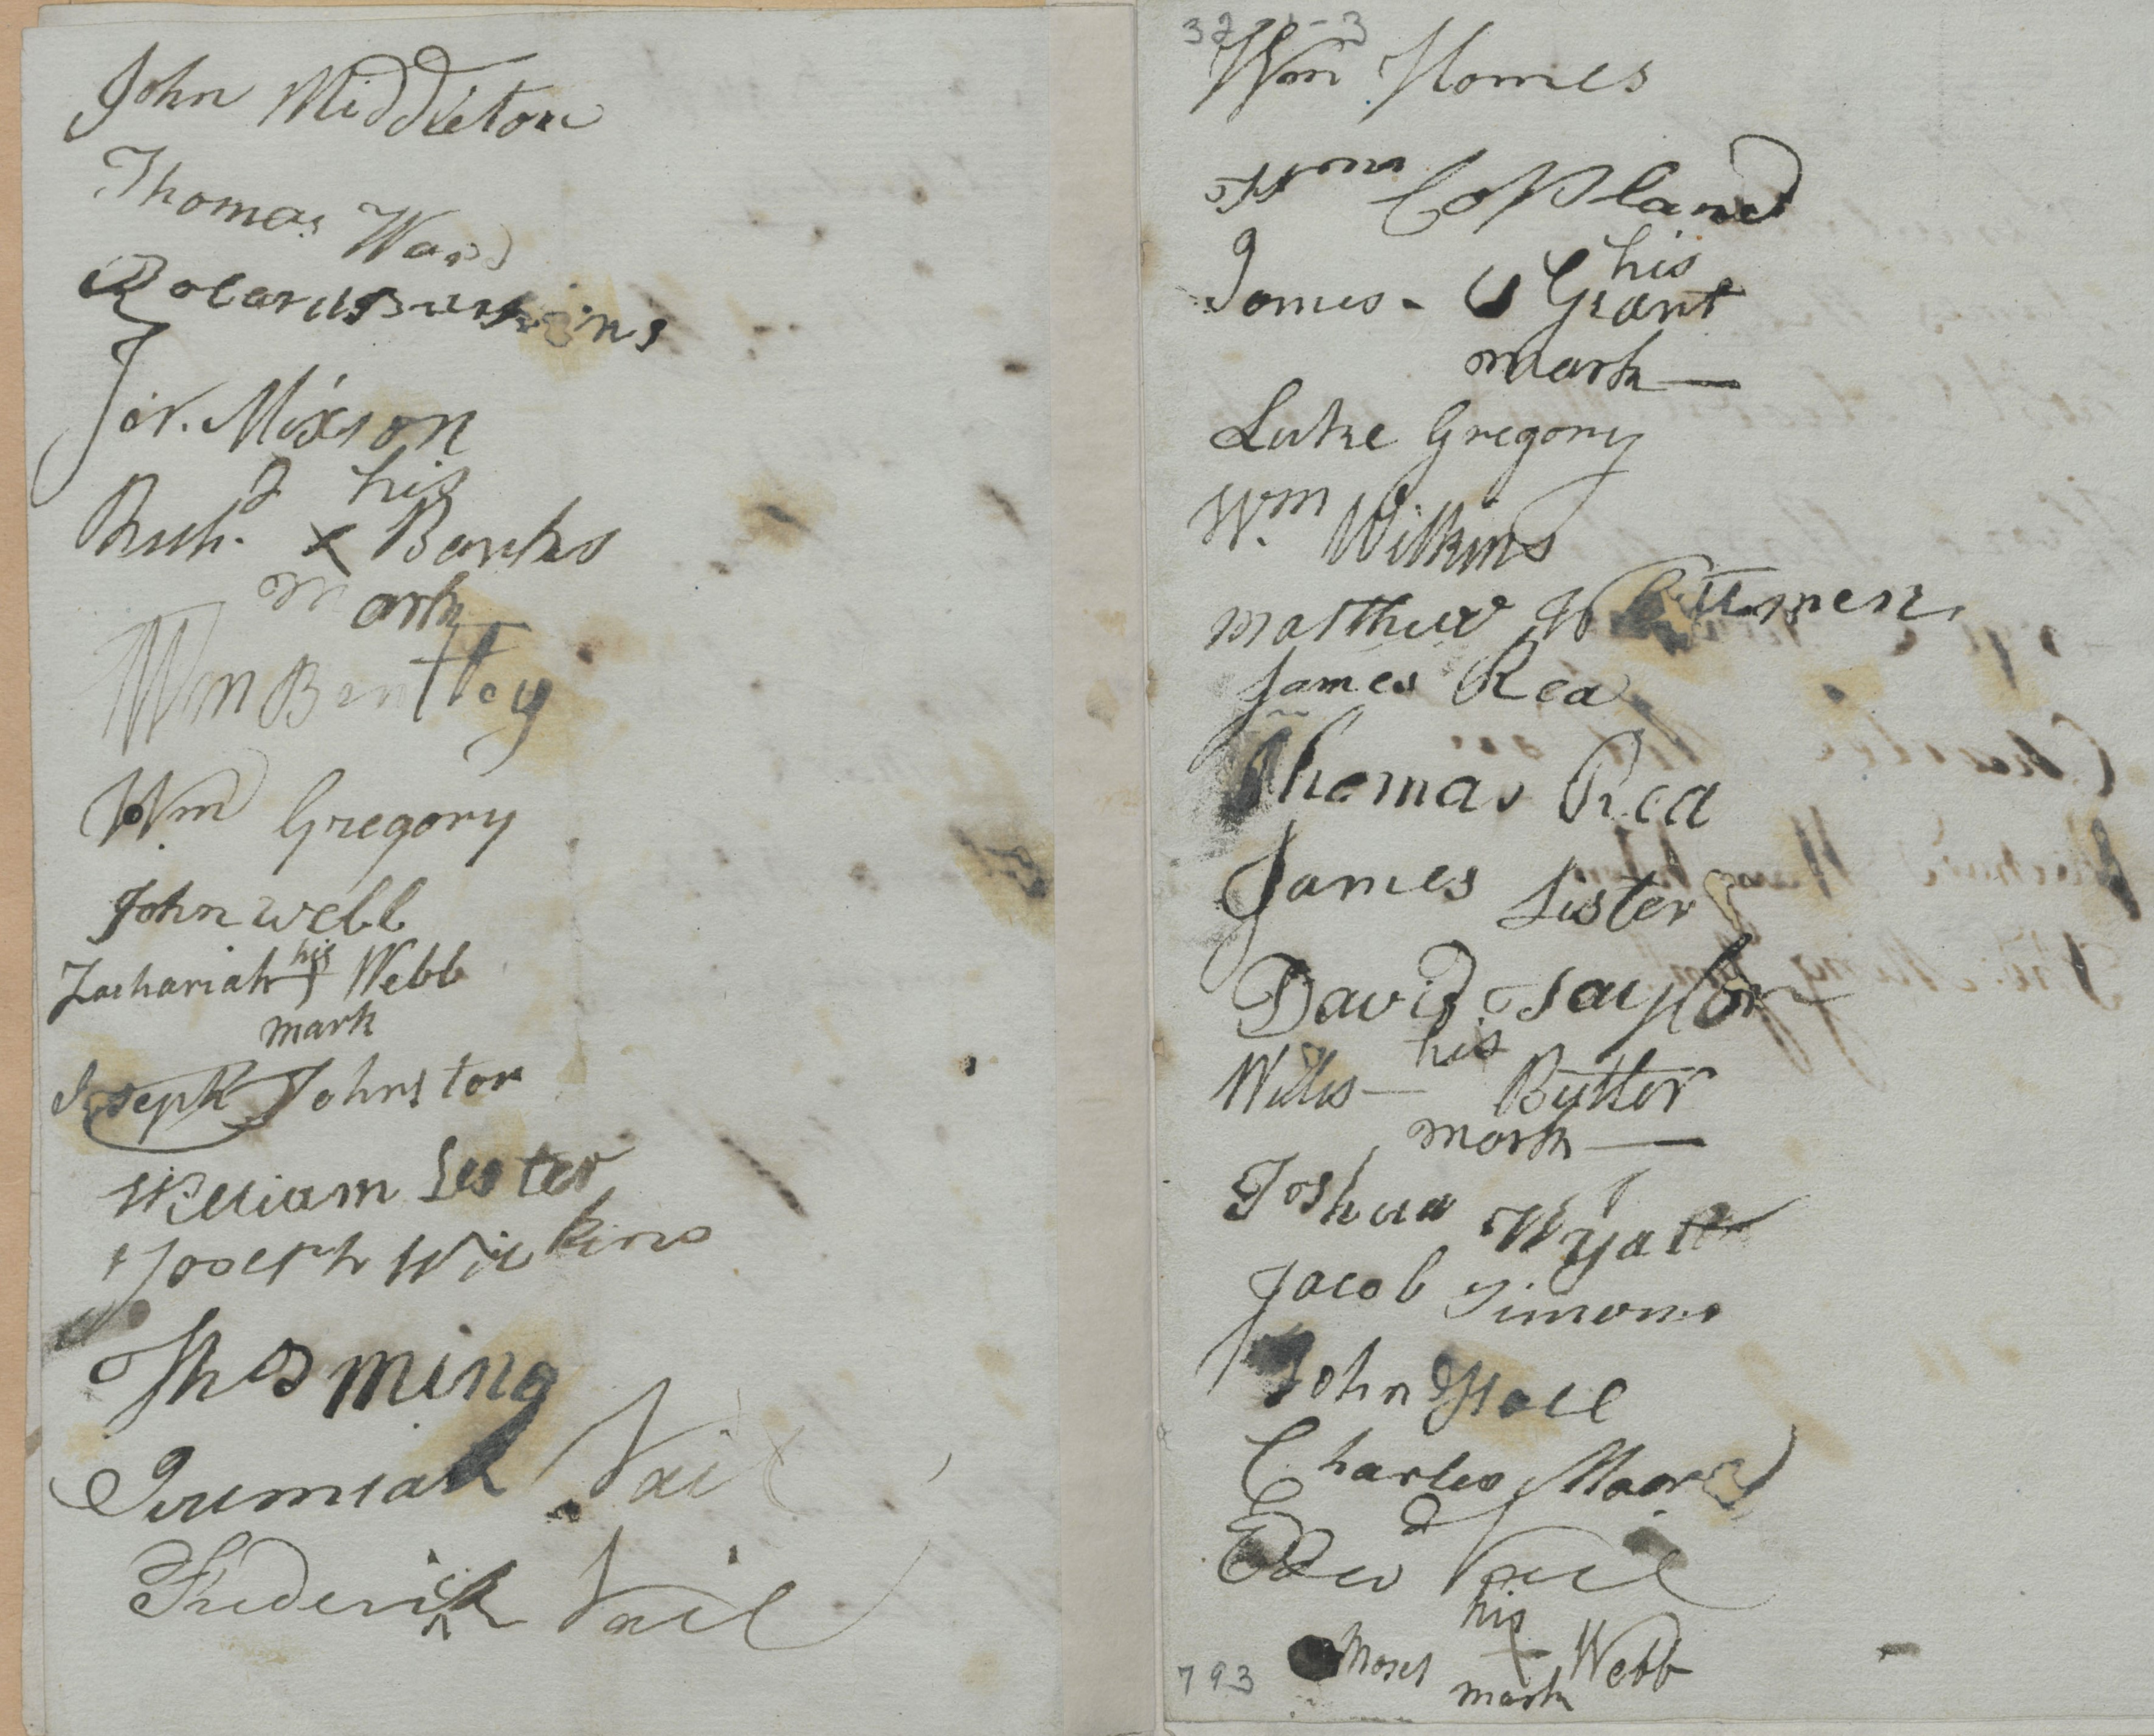 List of People Swearing the Oath of Allegiance in Chowan County, 2 May 1778, page 3